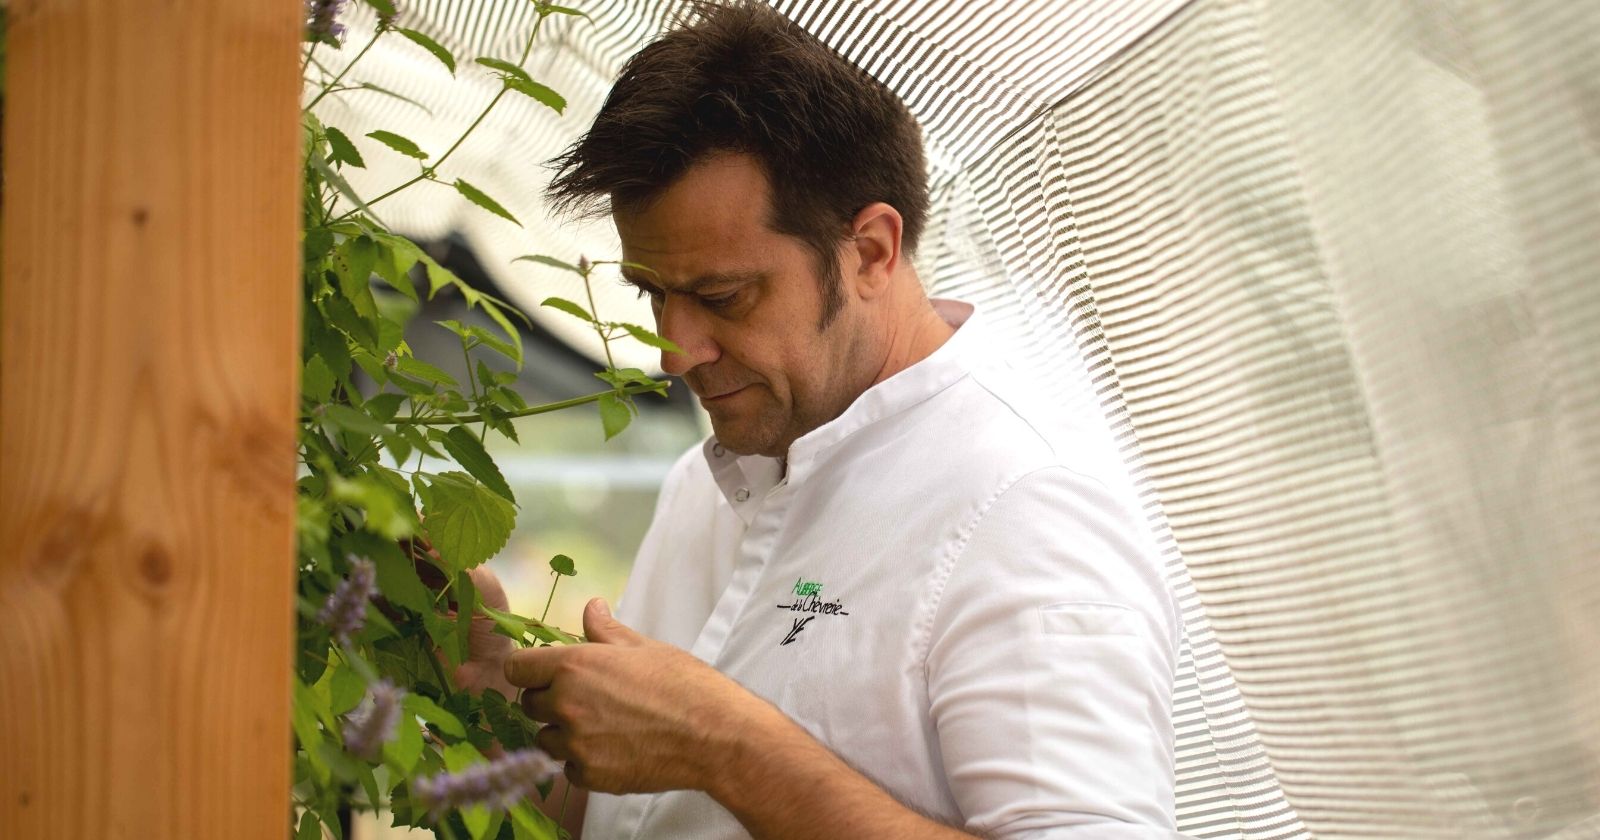 “Respecting the seasonality stimulates creativity”: this chef grows his products in his greenhouse